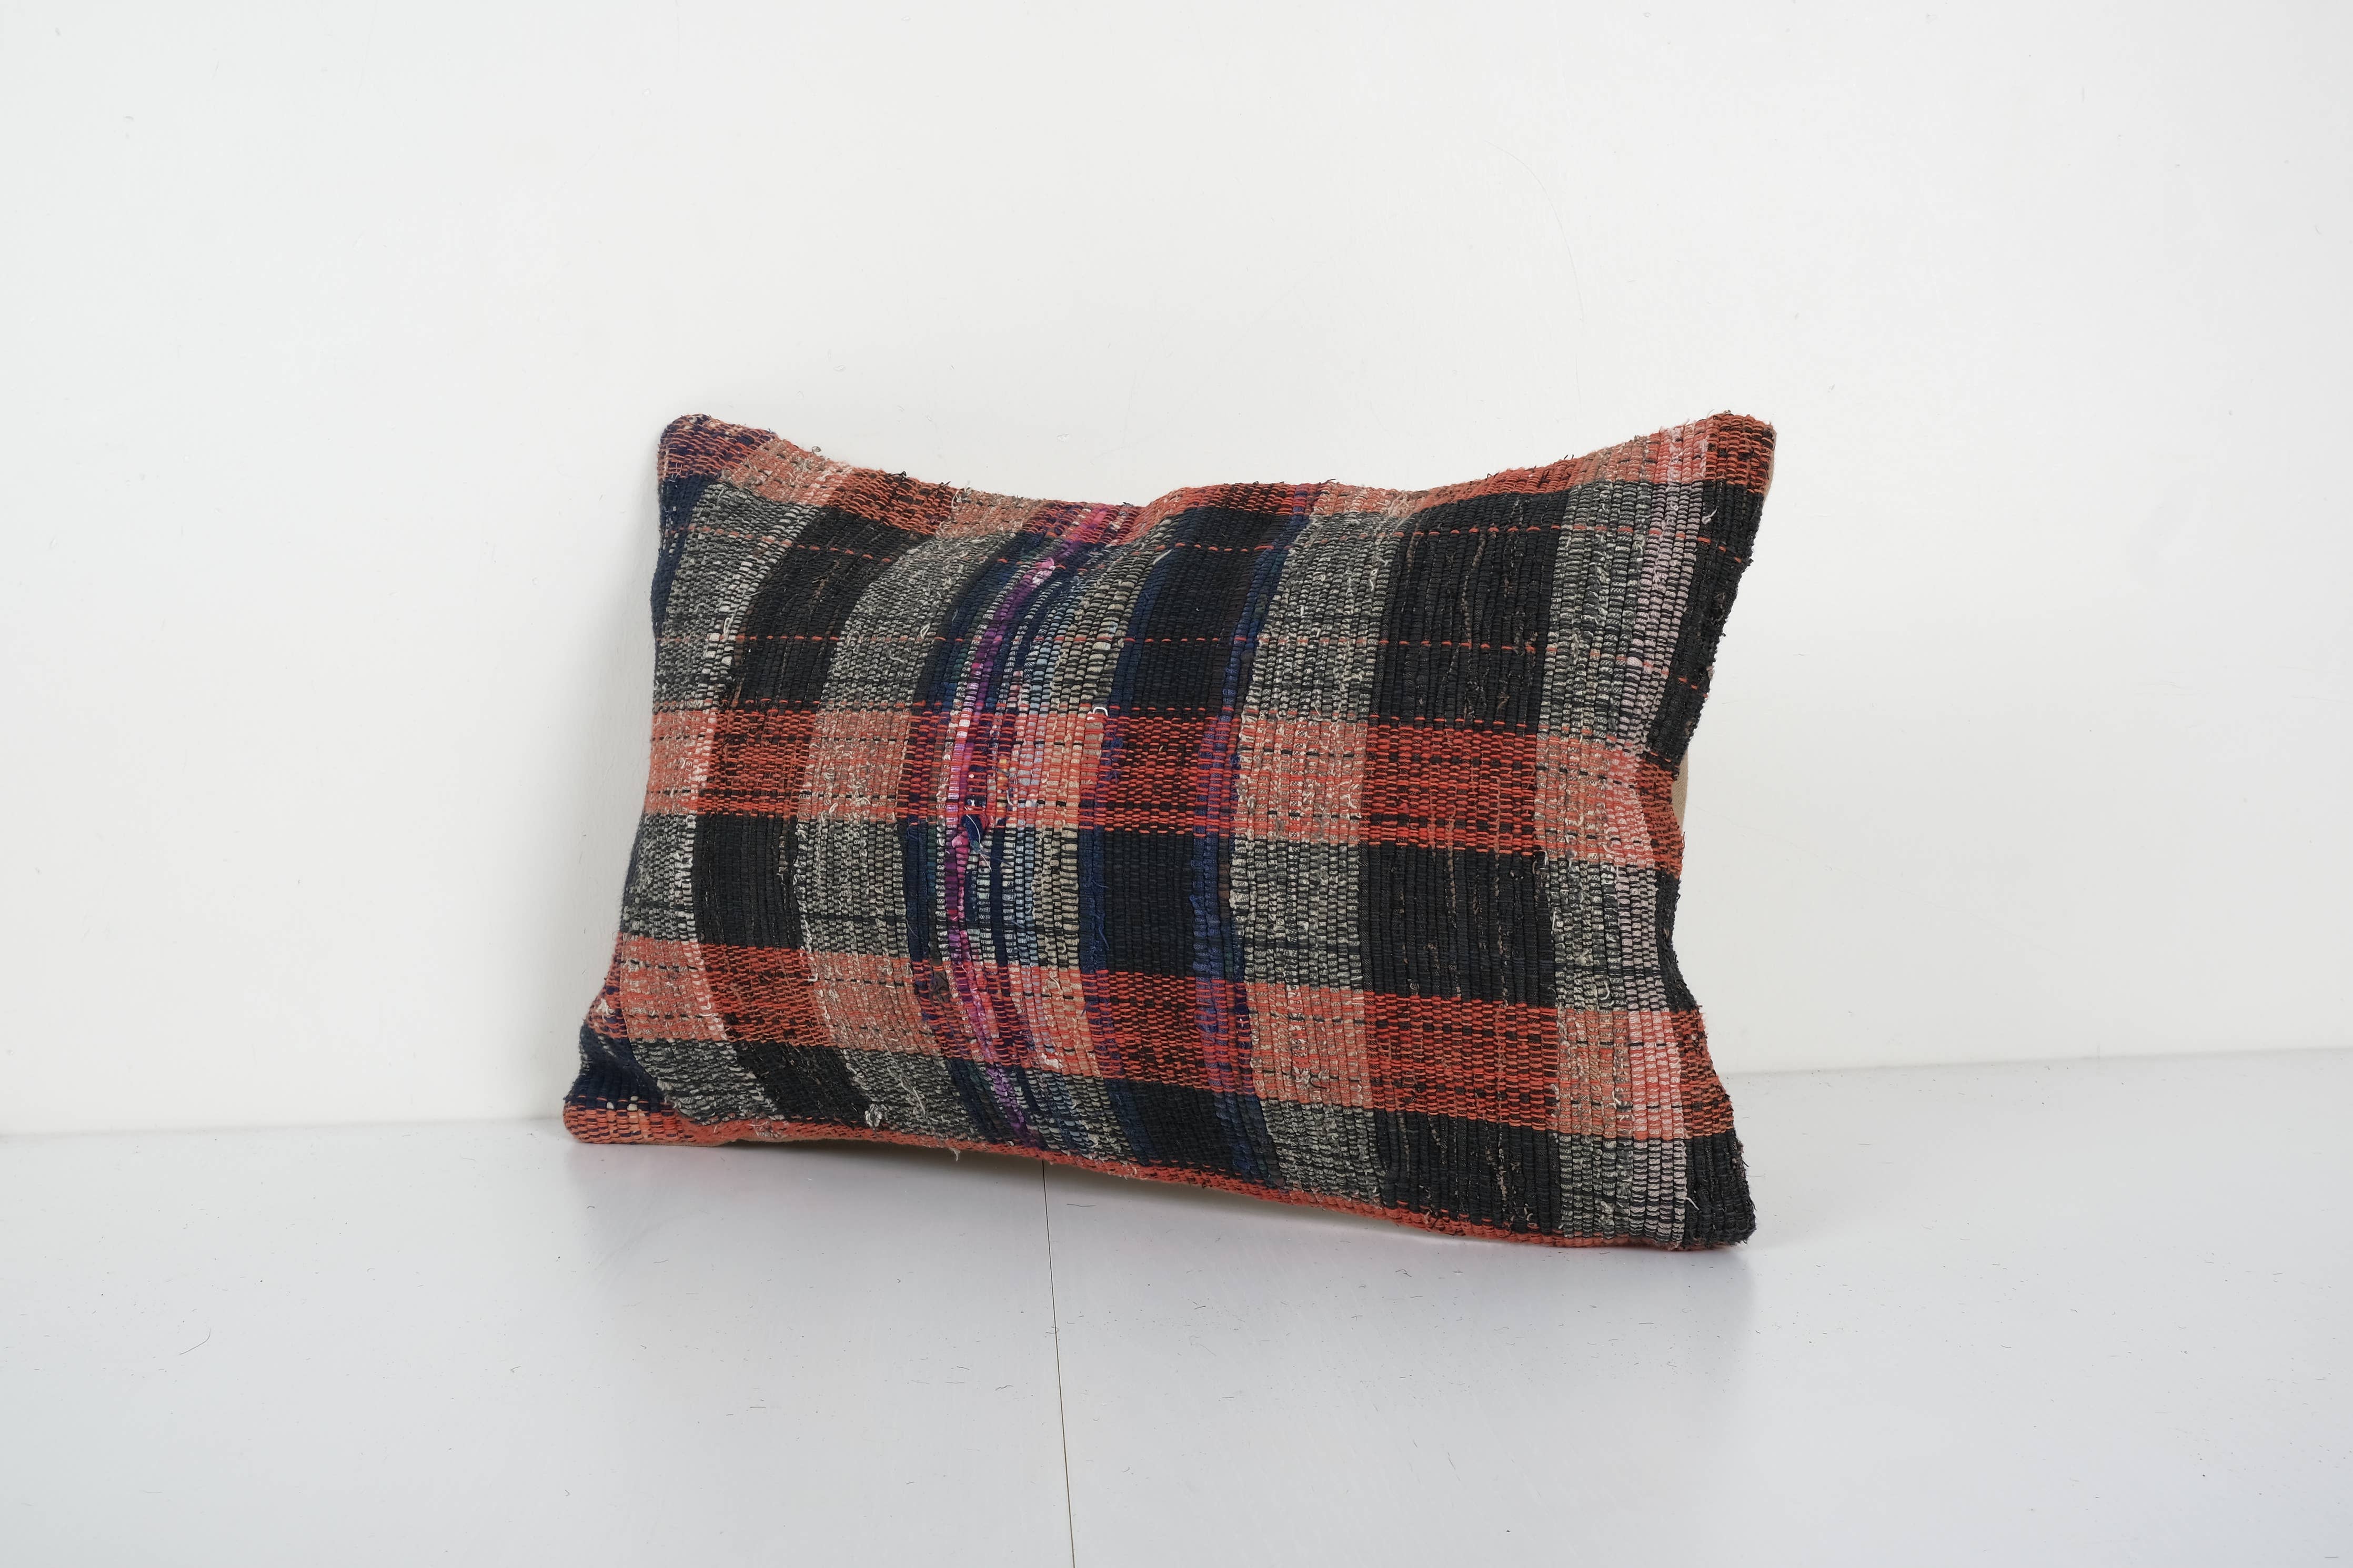 Vintage Pillows Store - Tribal Wool Handmade Pillow Covers, Striped Turkish Kilim